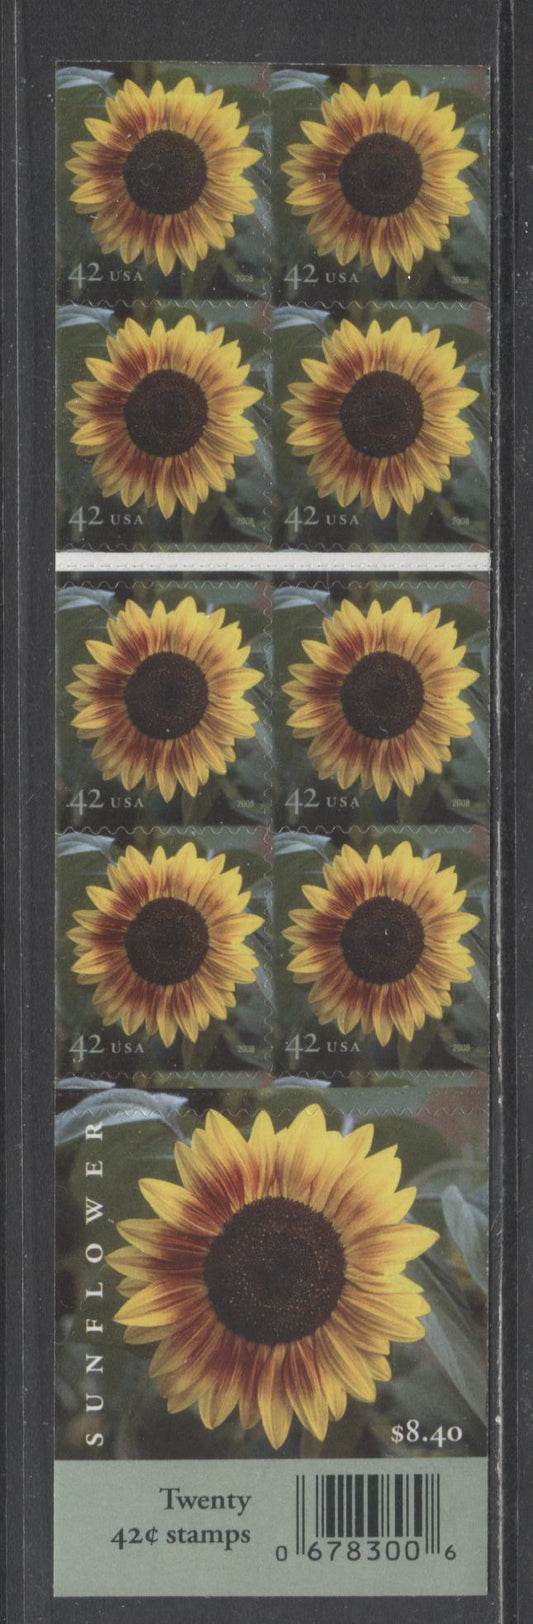 Lot 232 United States SC#4327a 42c Multicolored 2008 Sunflower Issue, Double-Sided Booklet, A VFNH Booklet Of 20, Click on Listing to See ALL Pictures, 2017 Scott Cat. $17